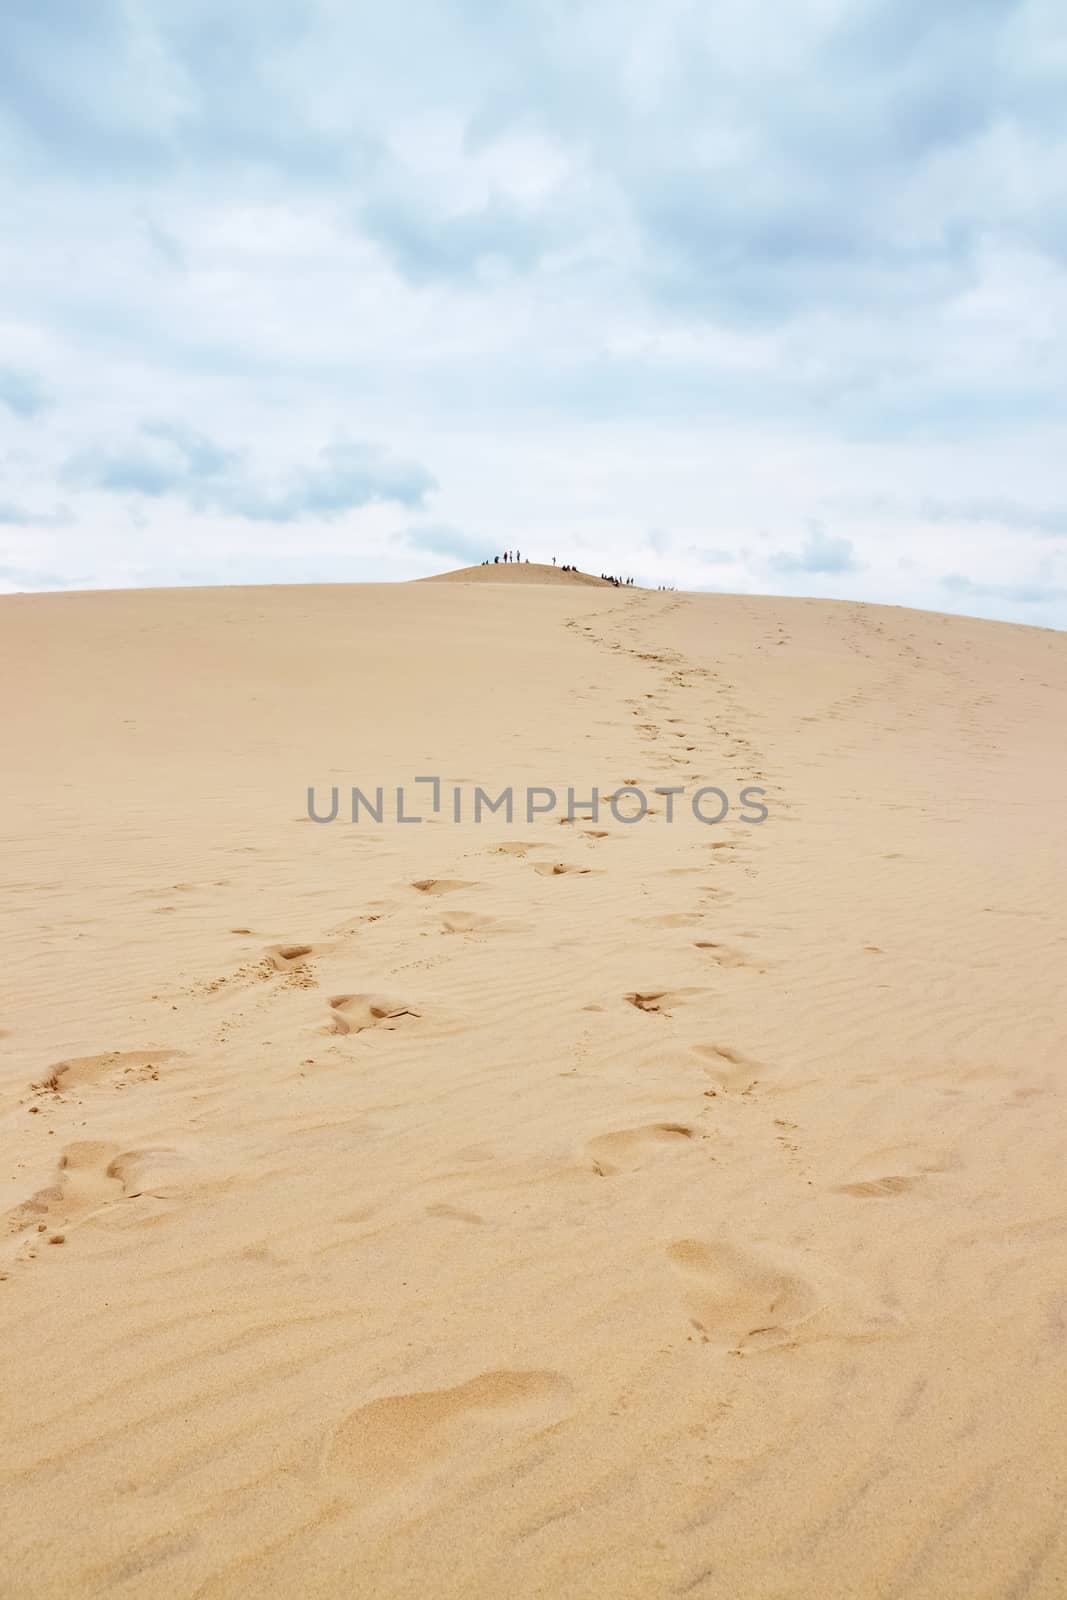 Footsteps leading to the top of Dune of Pilat (Dune du Pilat), the tallest sand dune in Europe located in the Arcachon Bay area, France.